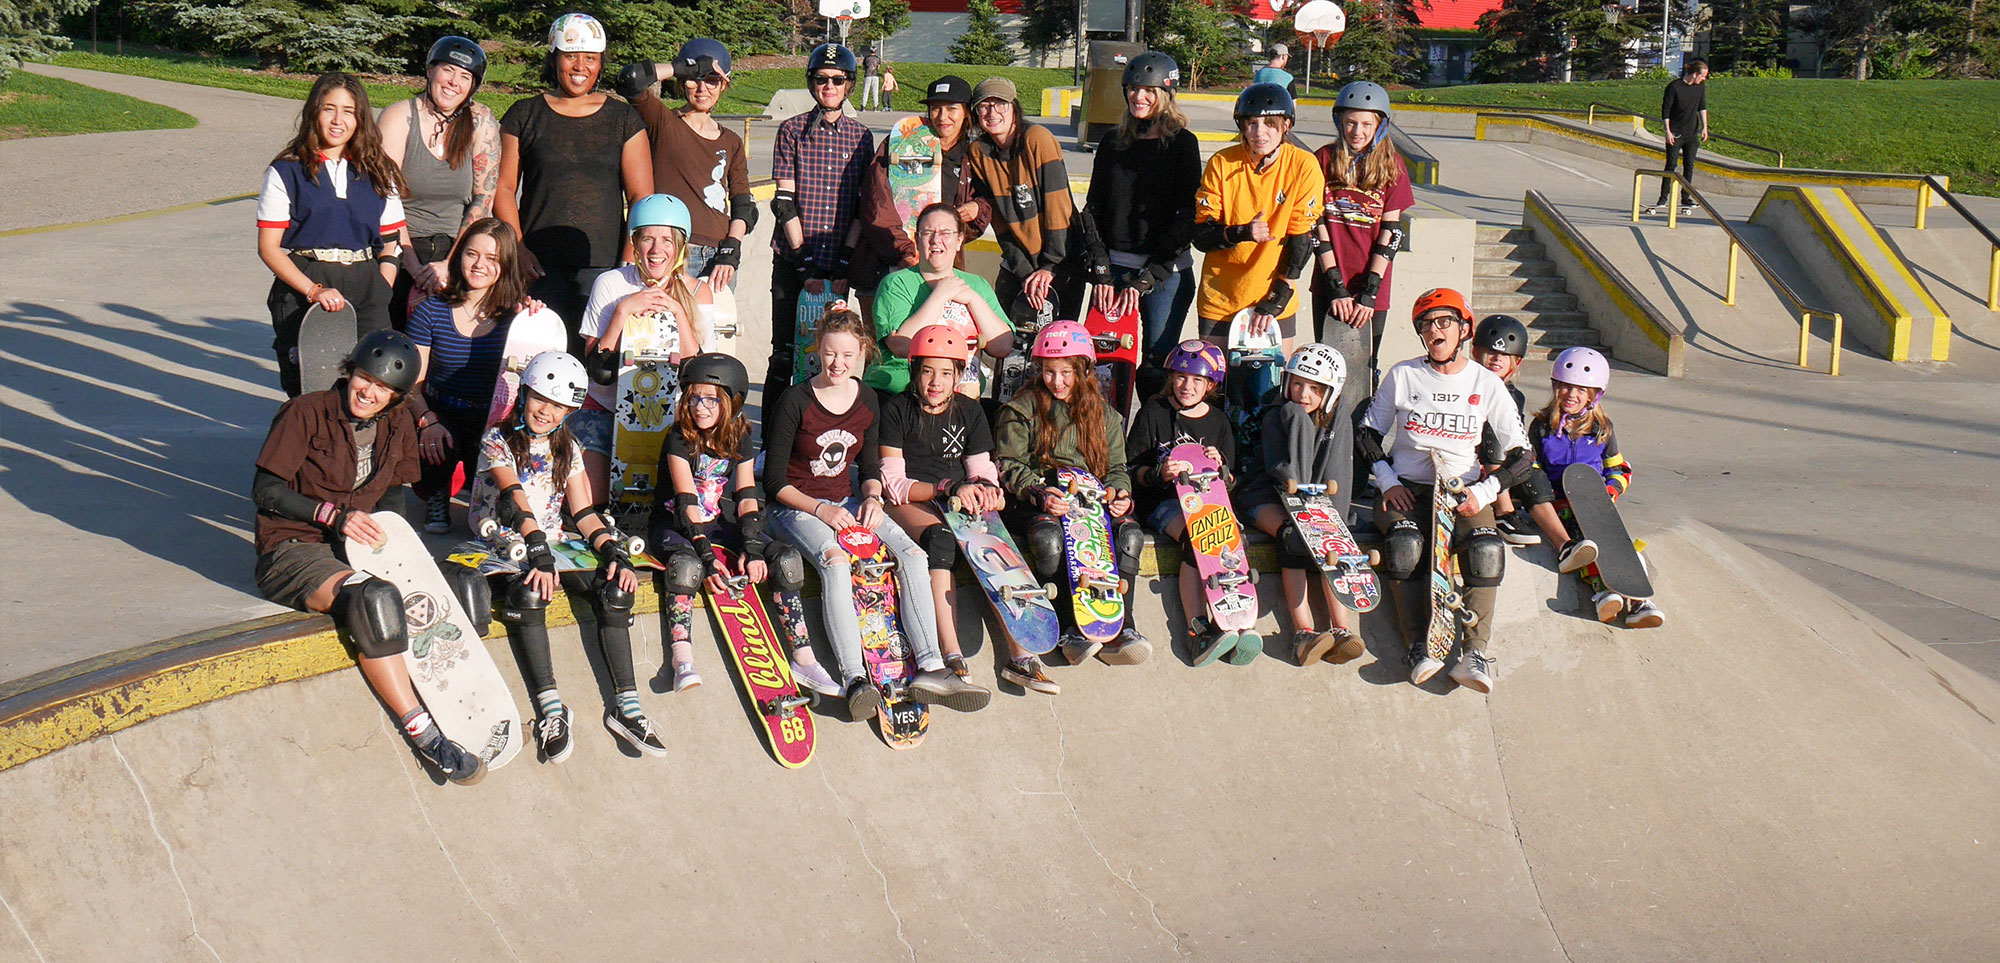 100 Percent skateclub for girls and women group photo